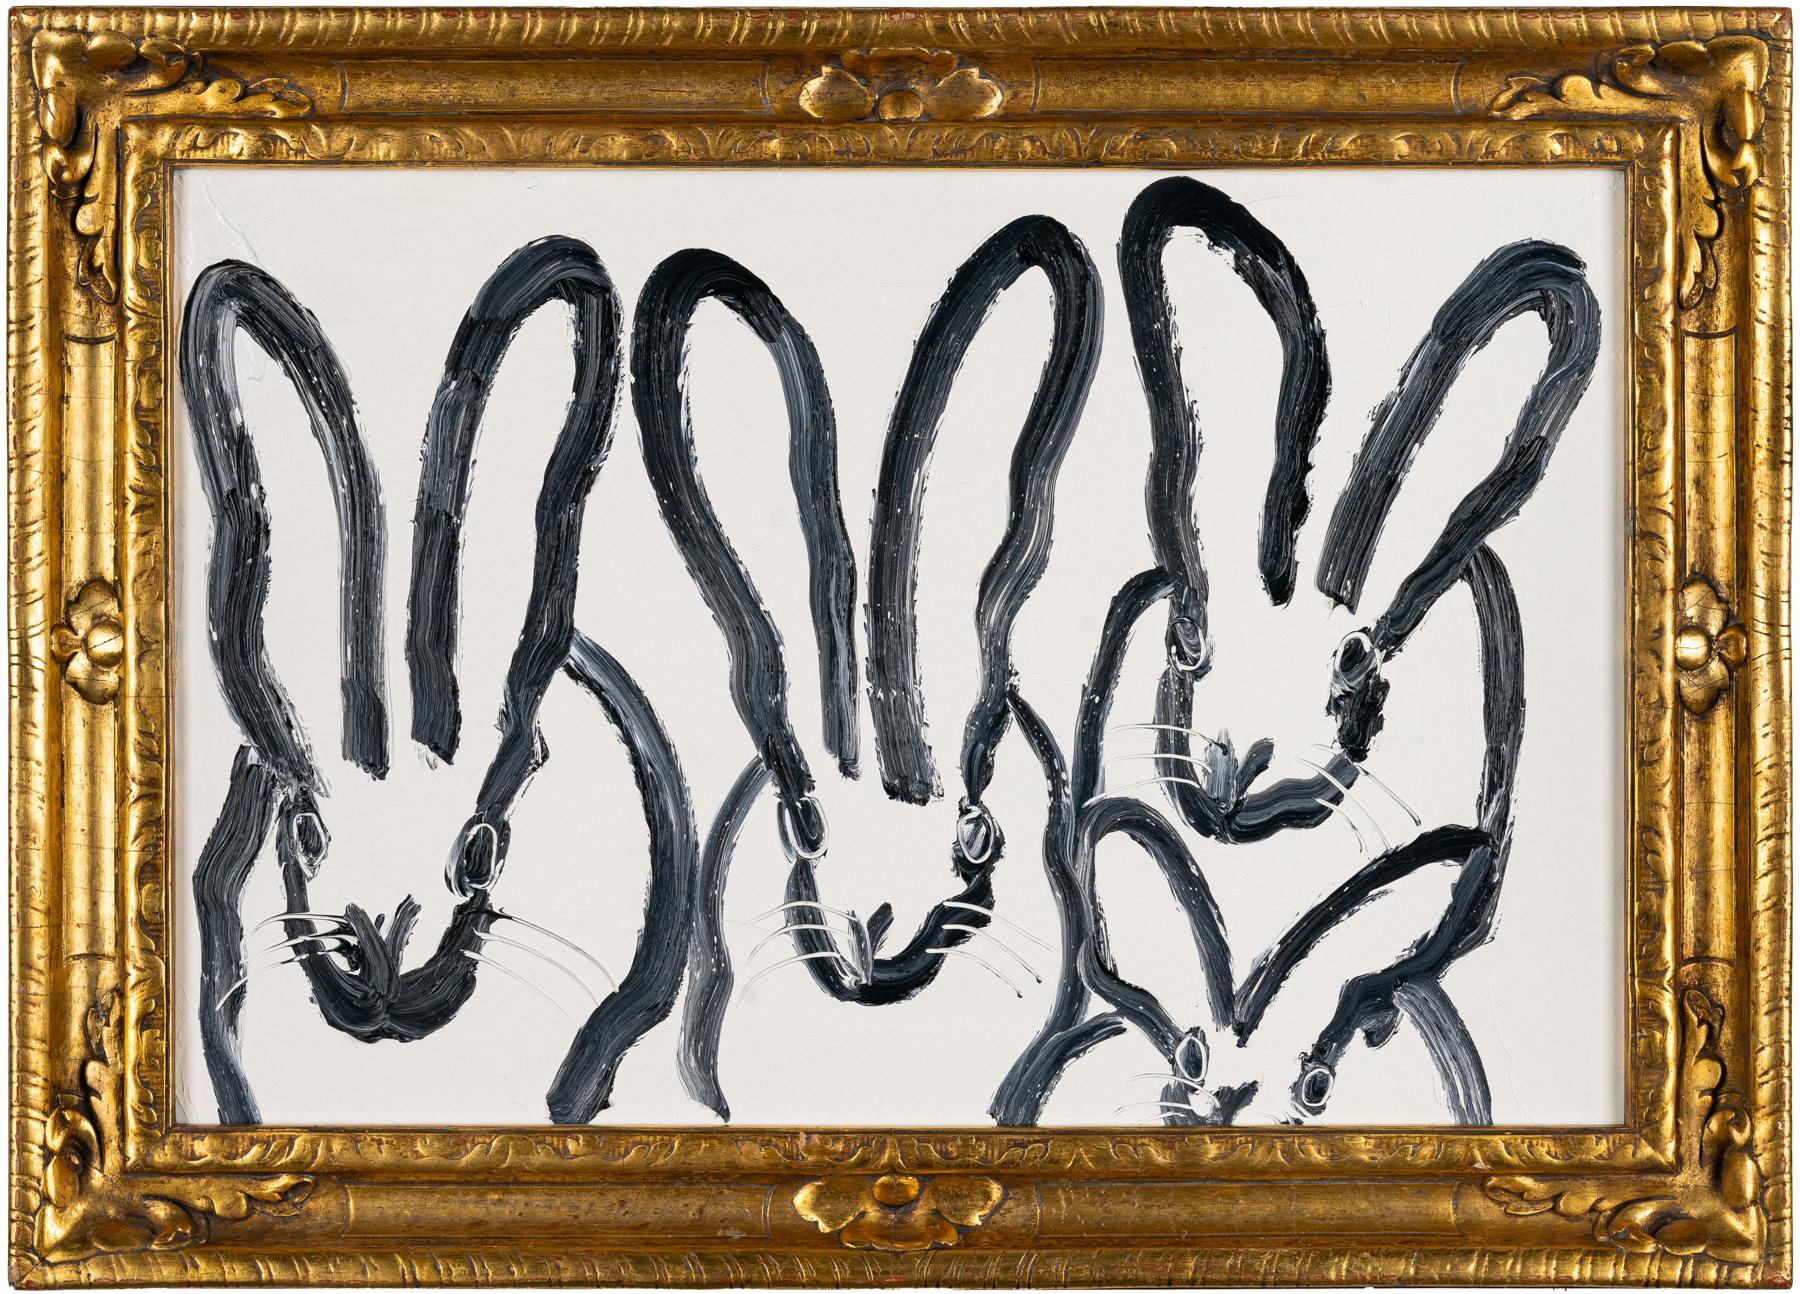 Hunt Slonem "4 Score" Bunnies on White
Gestured bunnies in black on a white background frame in an antique gold frame. 

Unframed: 16 x 23.5 inches
Framed: 20.5 x 28.5 inches
*Painting is framed - Please note Hunt Slonem paintings with frames may